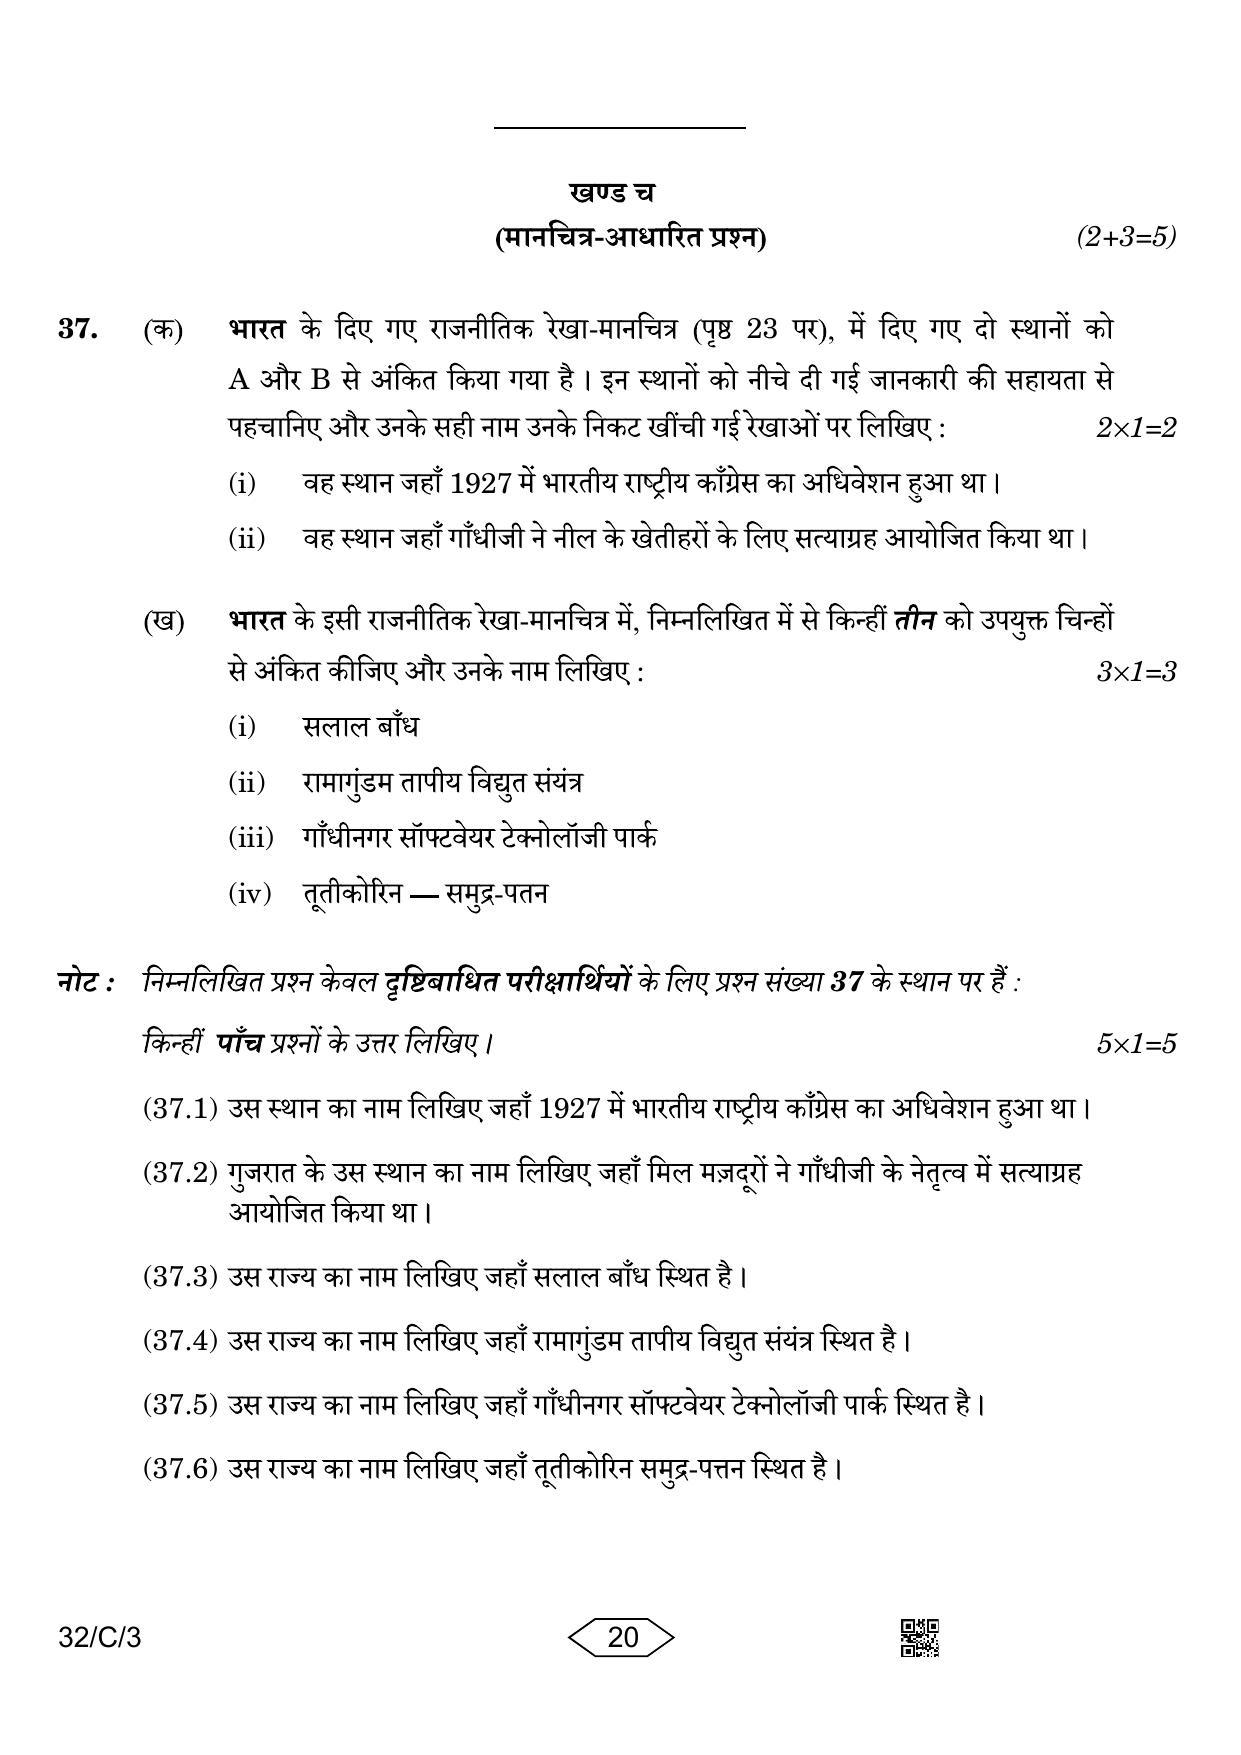 CBSE Class 10 32-3 Social Science 2023 (Compartment) Question Paper - Page 20